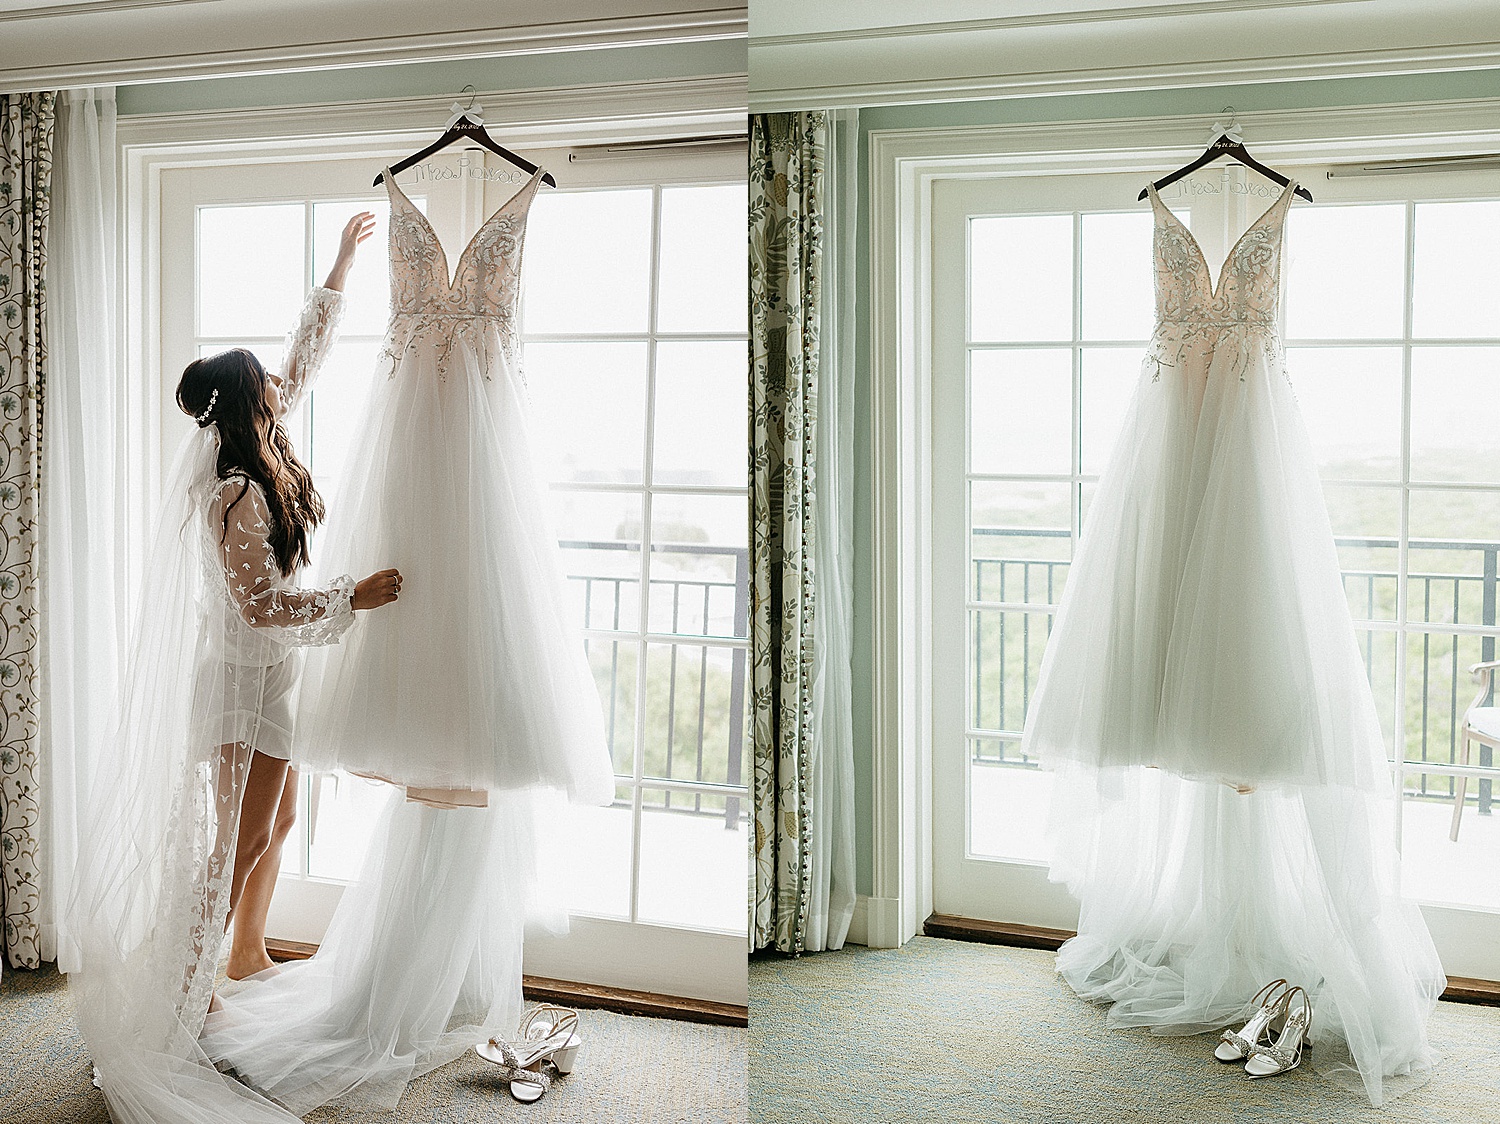 Bride in lace white getting ready outfit looking at wedding dress by Emily Burns photo